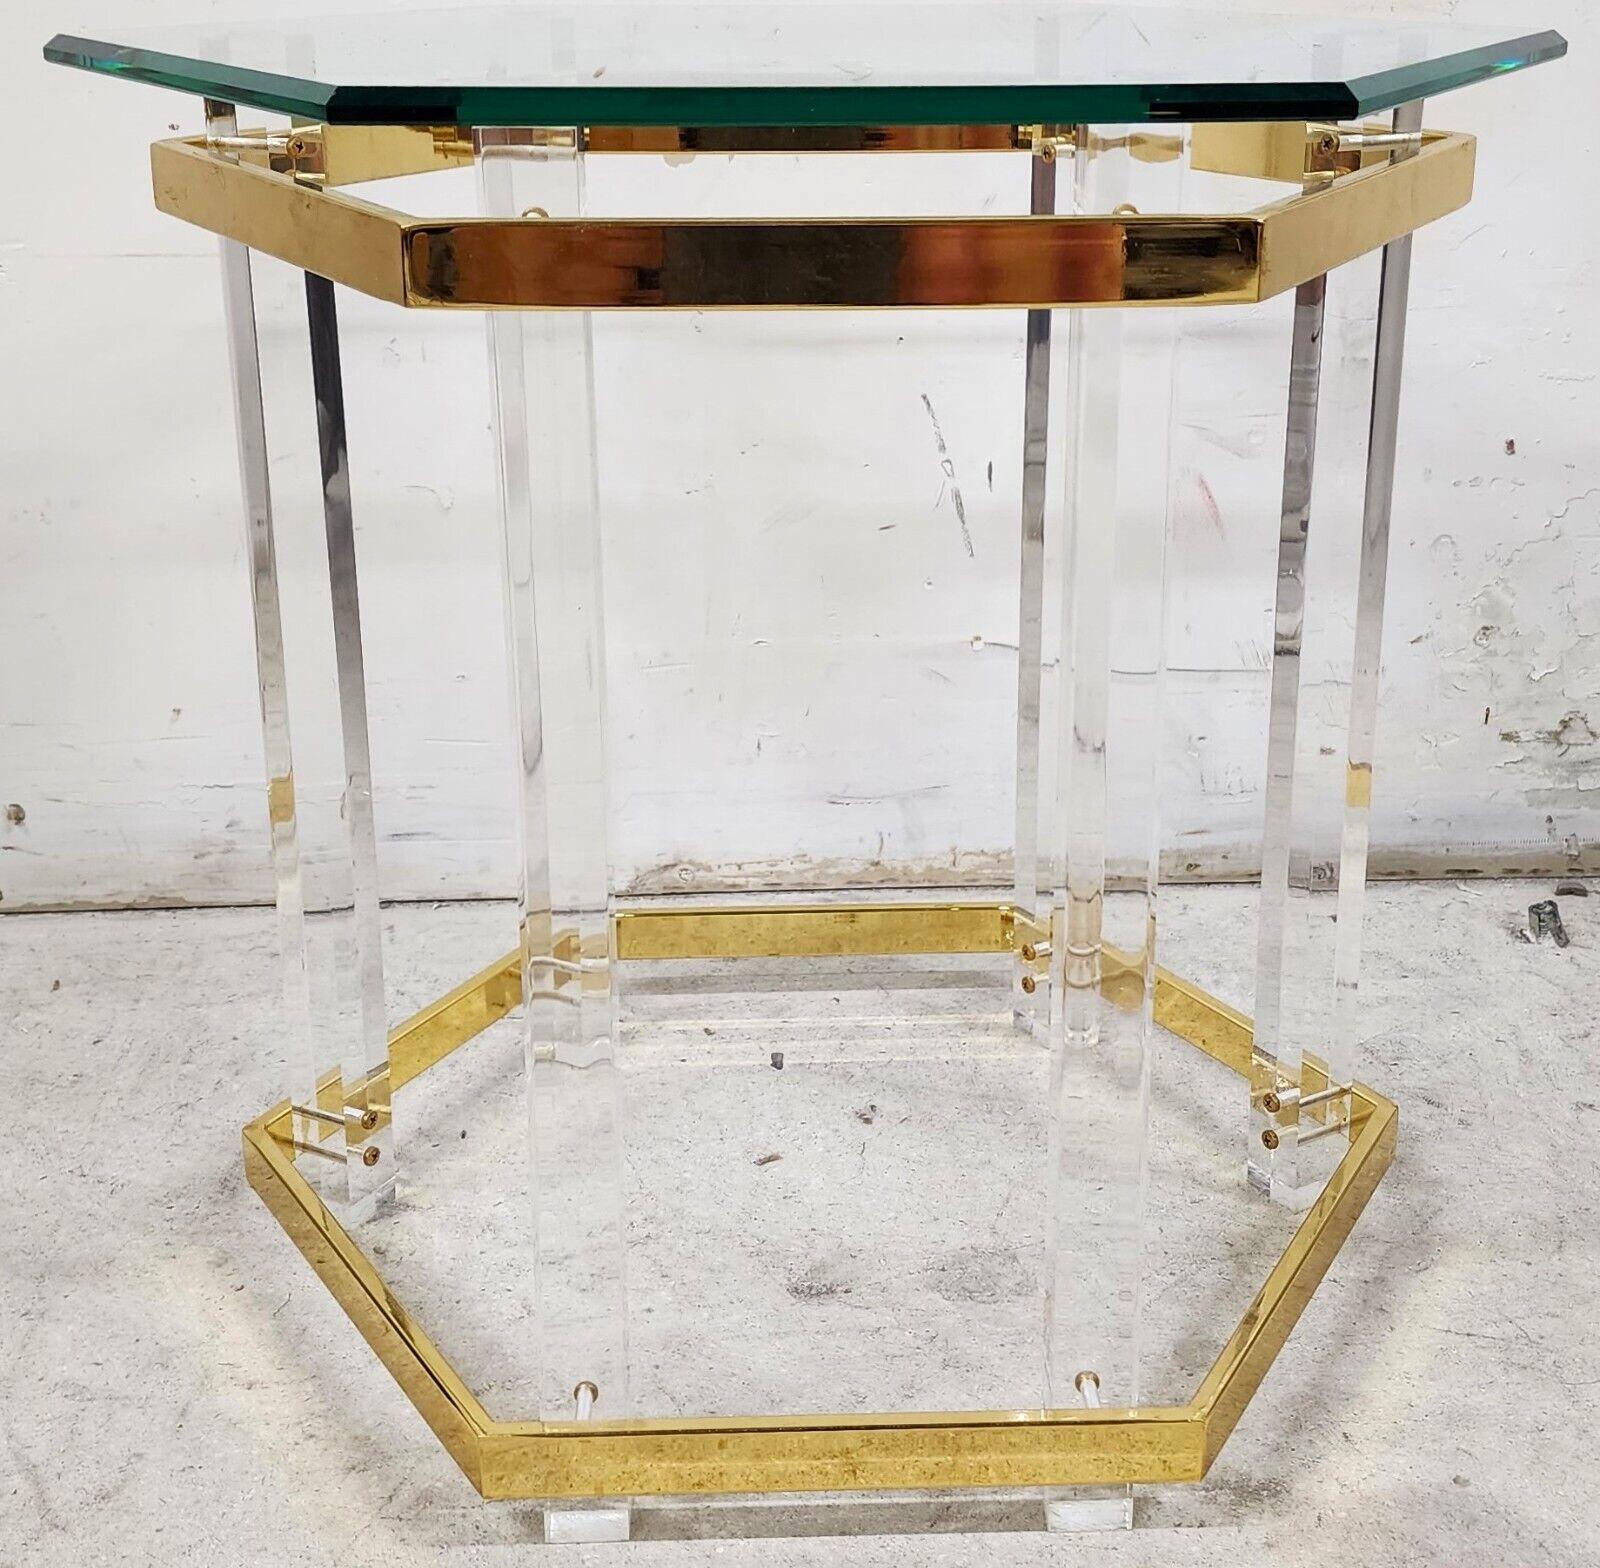 For FULL item description click on CONTINUE READING at the bottom of this page.

Offering One Of Our Recent Palm Beach Estate Fine Furniture Acquisitions Of A

Charles Hollis Jones Style Lucite, Glass & 24 Karat Gold Plated Side Table by Regency